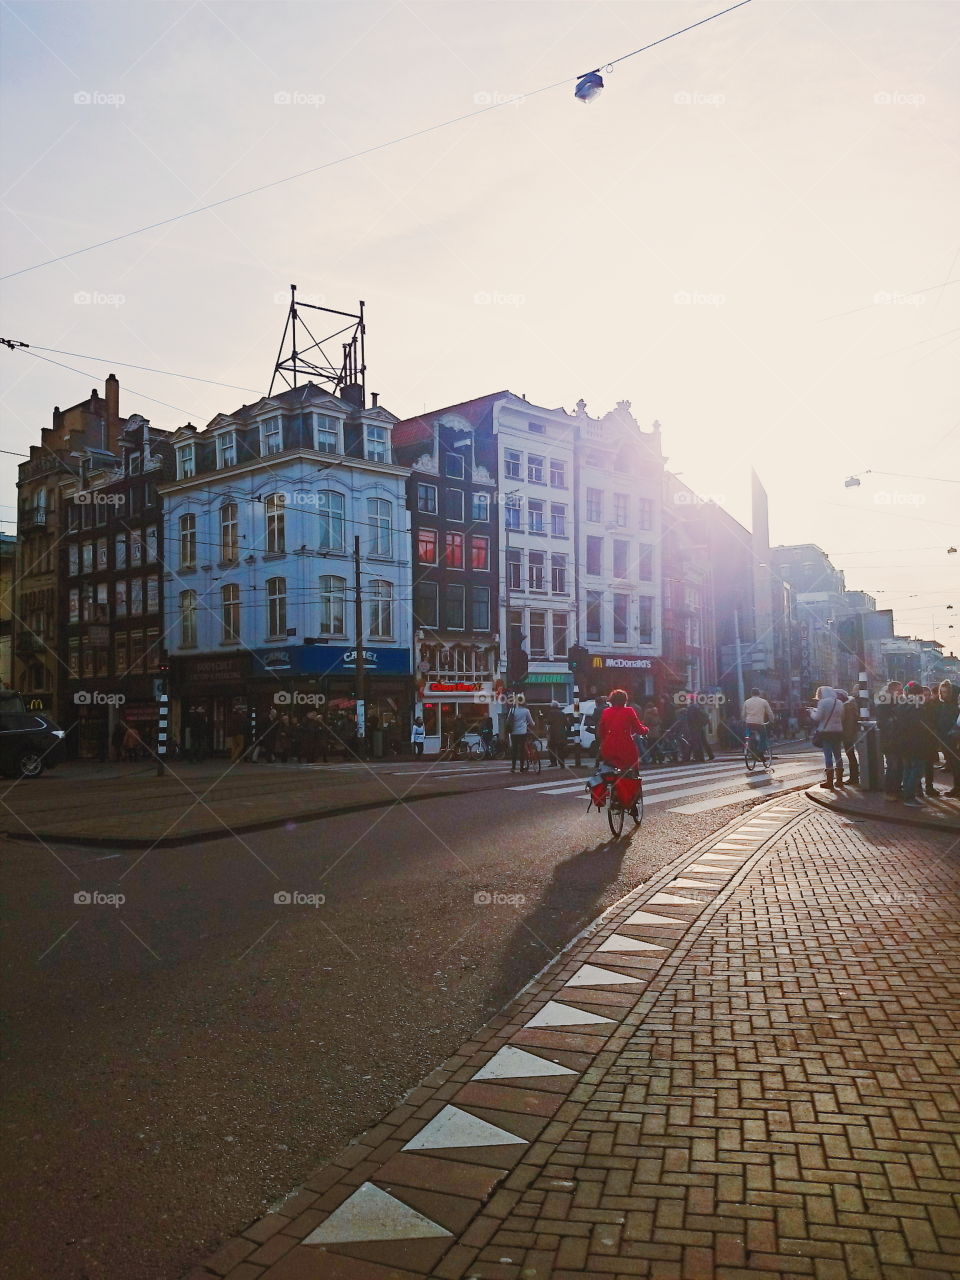 lady in red biking . Amsterdam, the Netherlands - January 2015